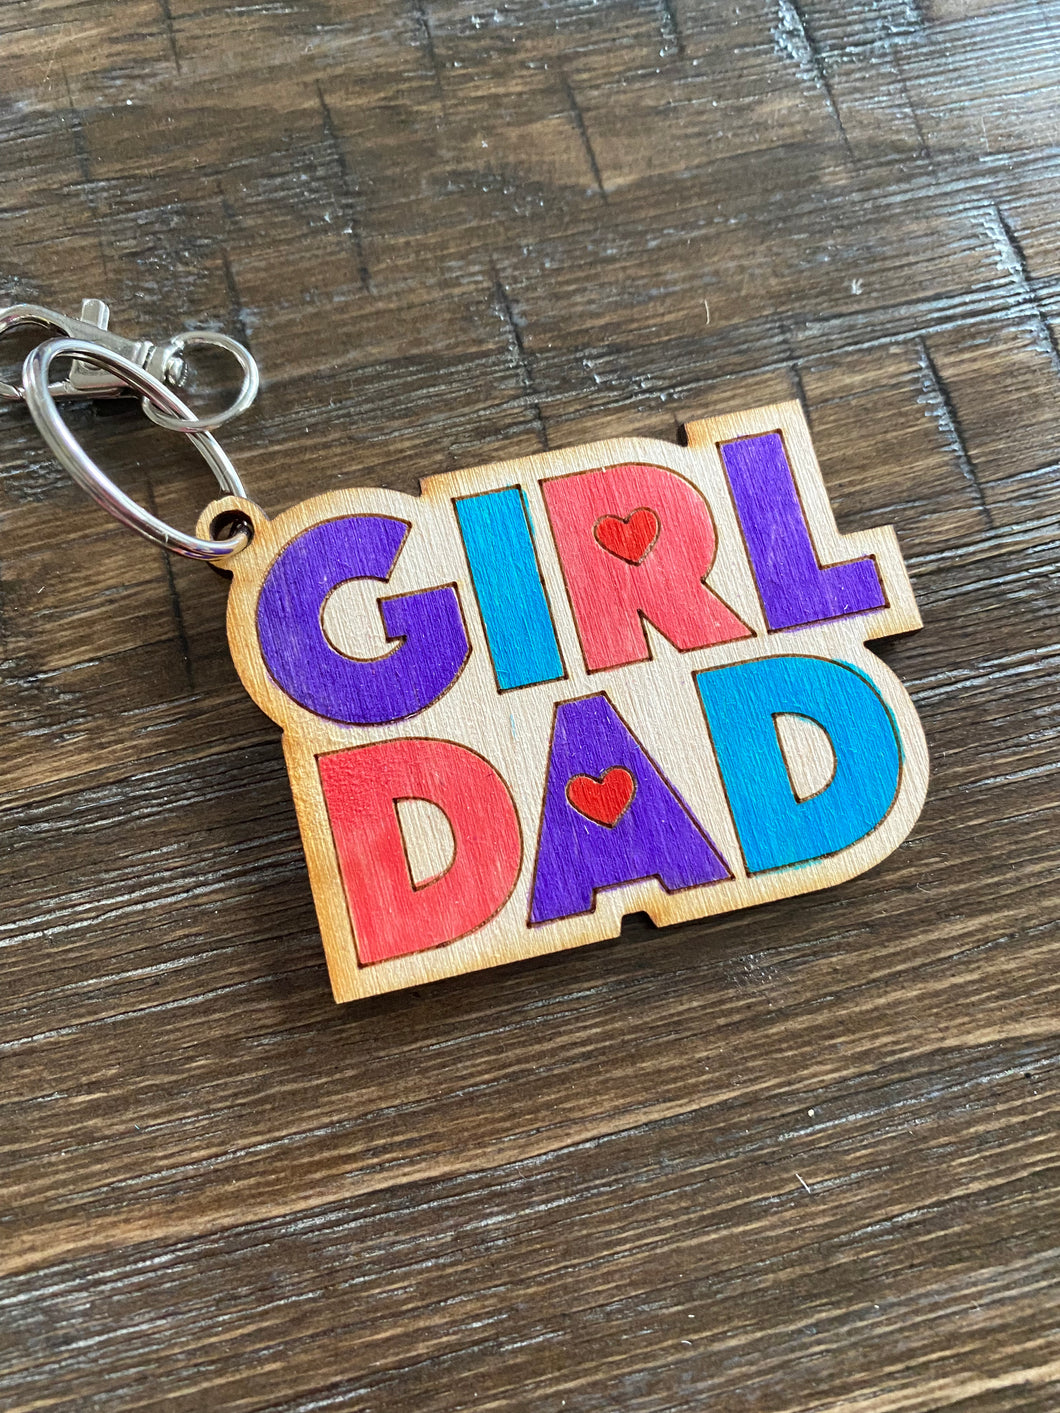 DIY Father’s Day Key Chains